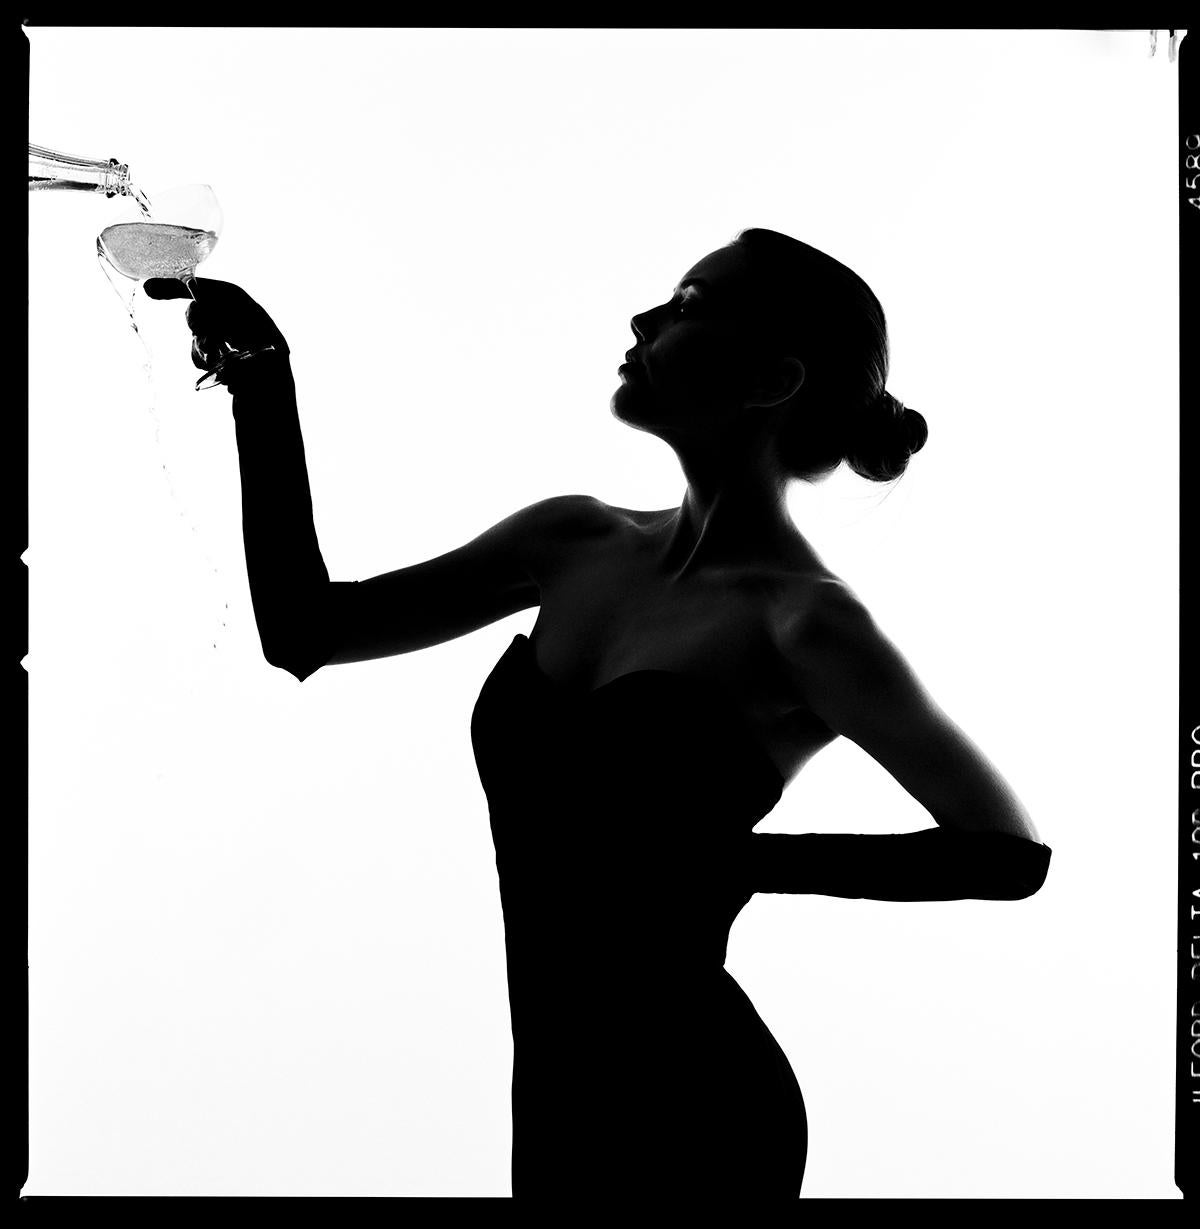 Tyler Shields - Champagne Pour Silhouette, Photography 2020